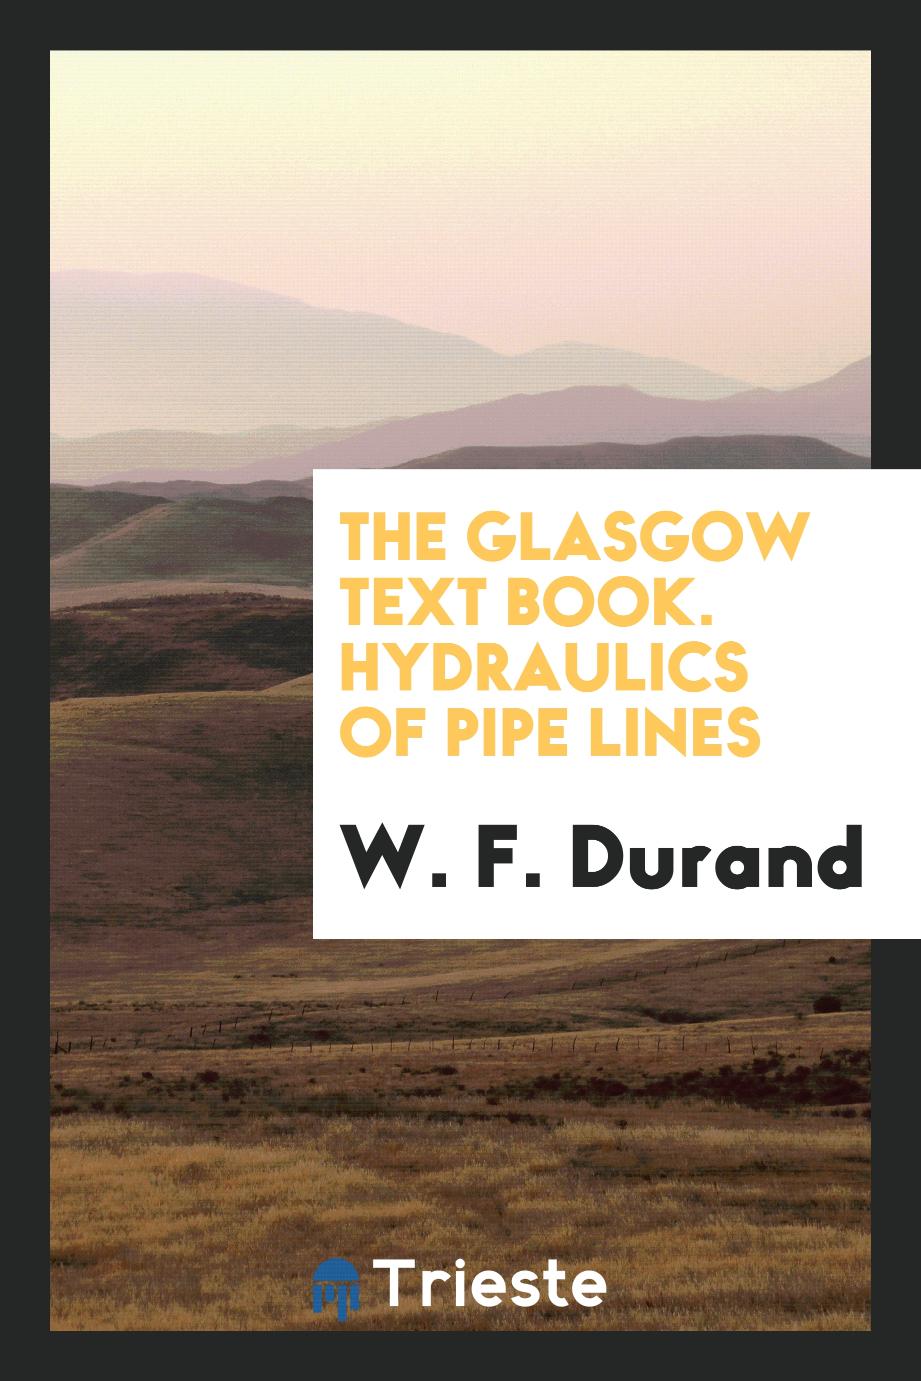 The Glasgow Text Book. Hydraulics of Pipe Lines